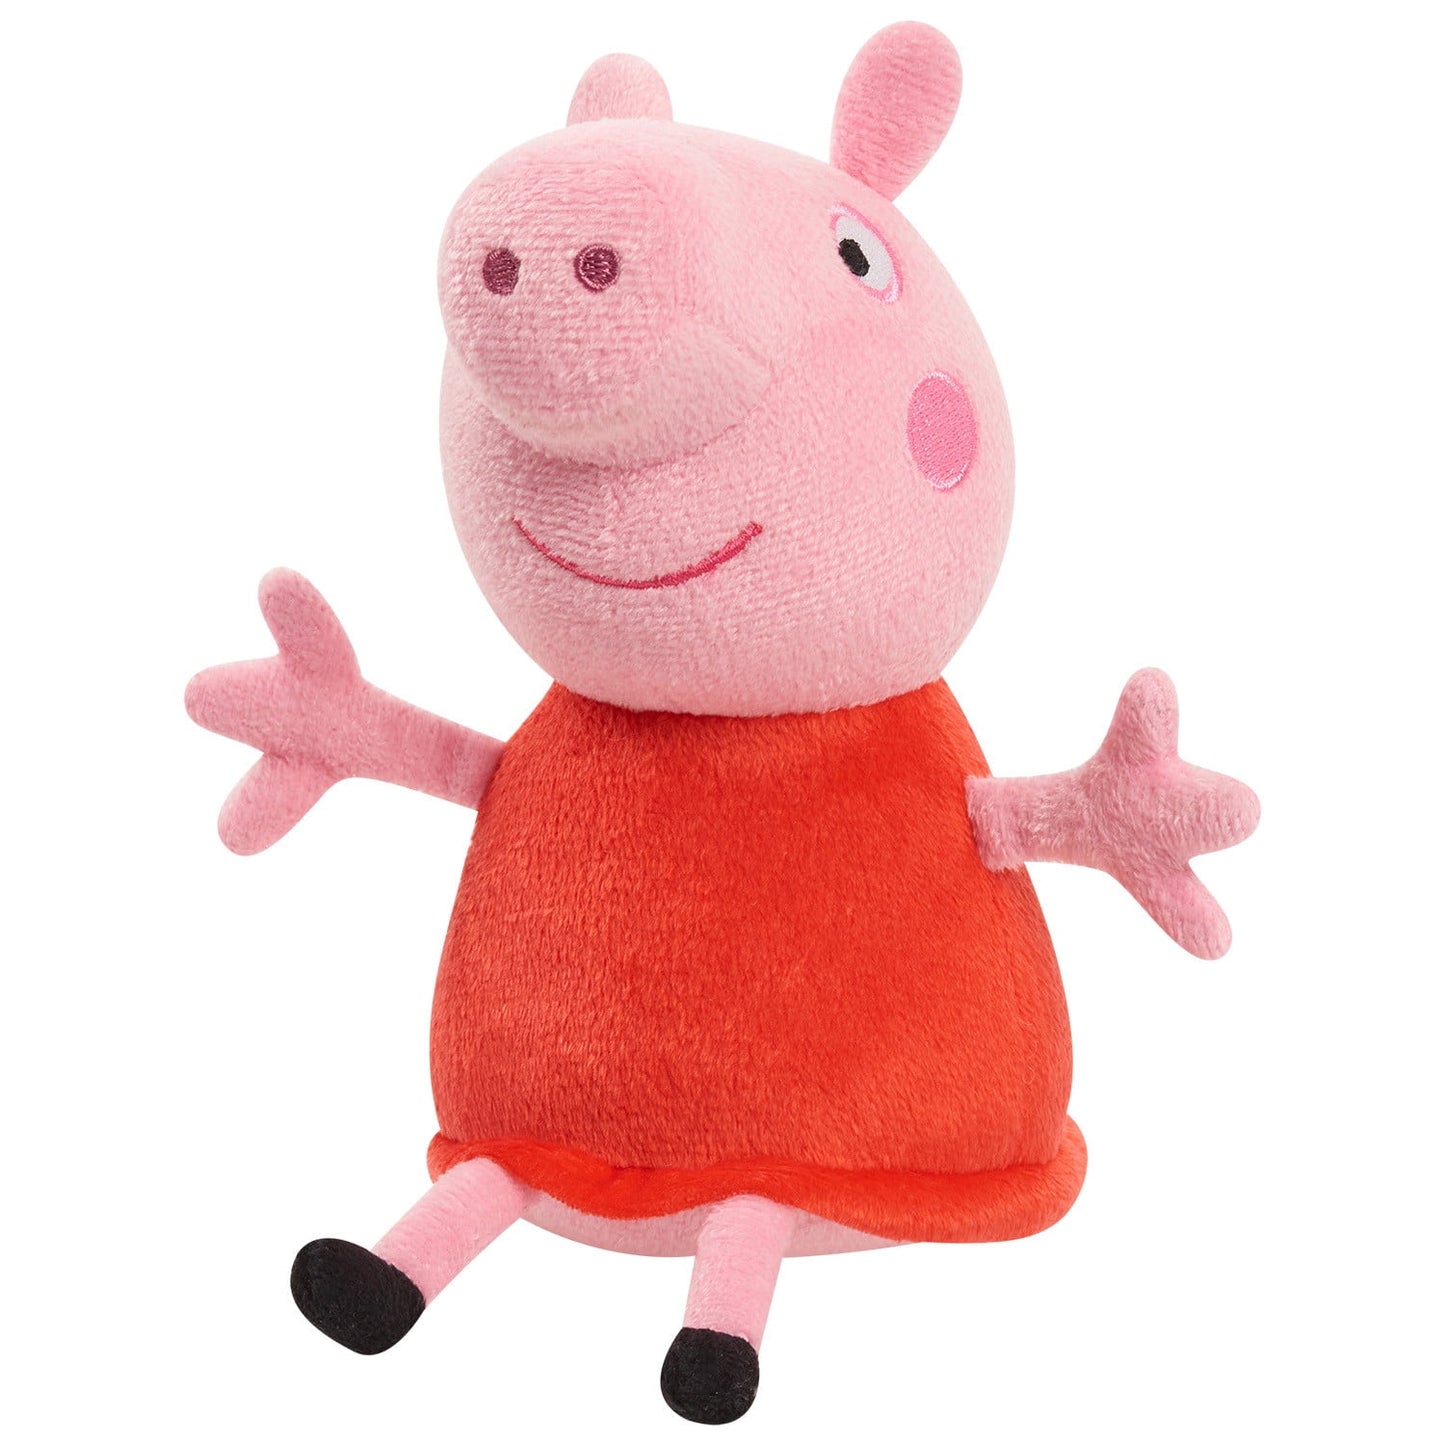 Peppa Pig 8-Inch Bean Plush Peppa Pig, Super Soft & Cuddly Small Plush Stuffed Animal, Kids Toys for Ages 2 up